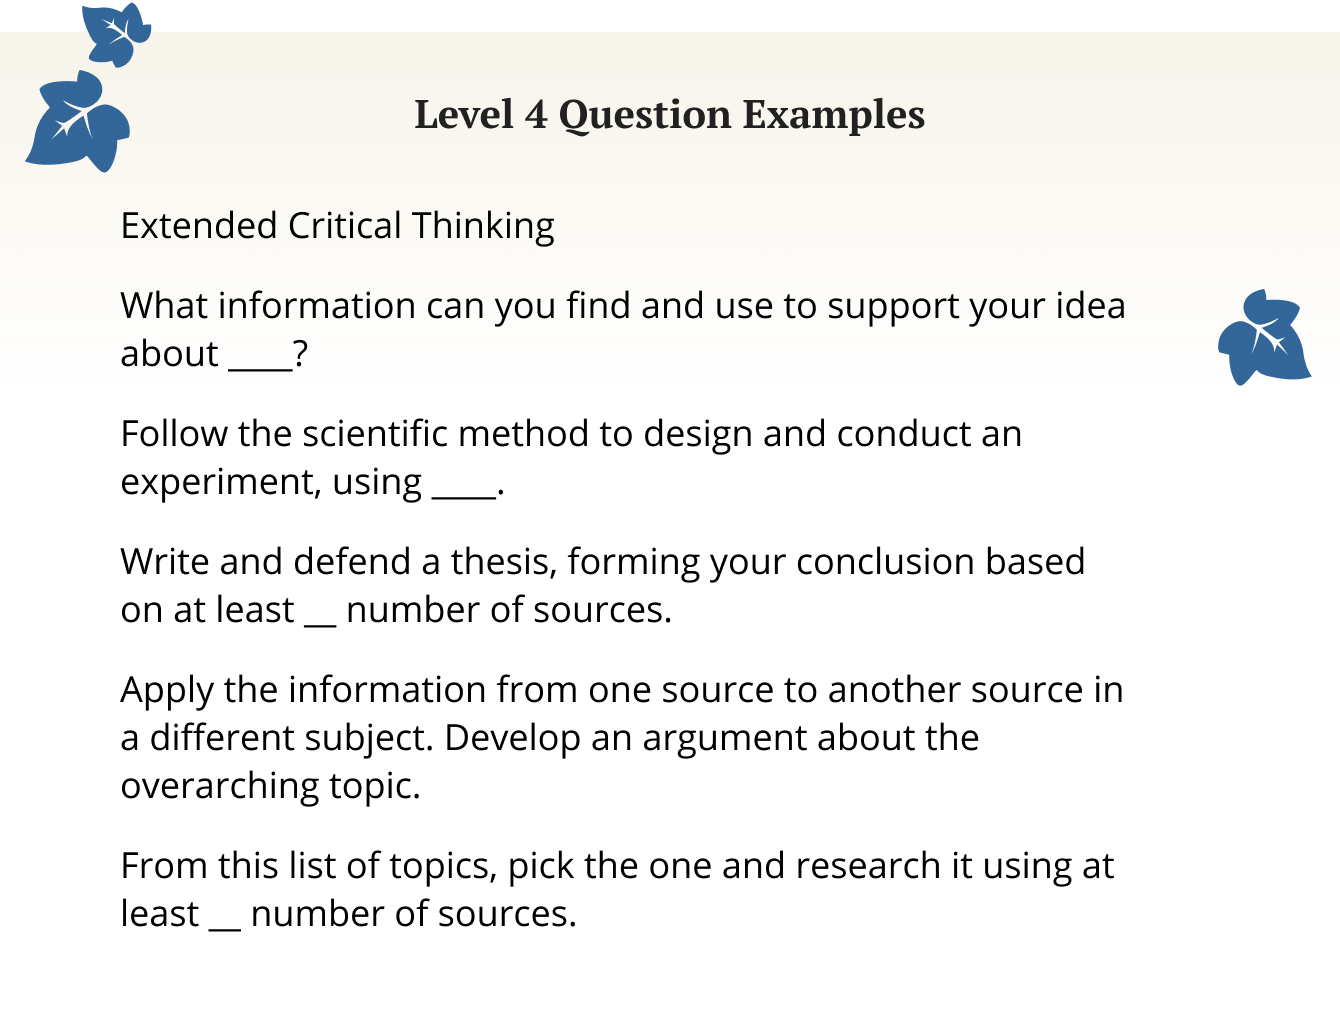 Level 4 question examples.